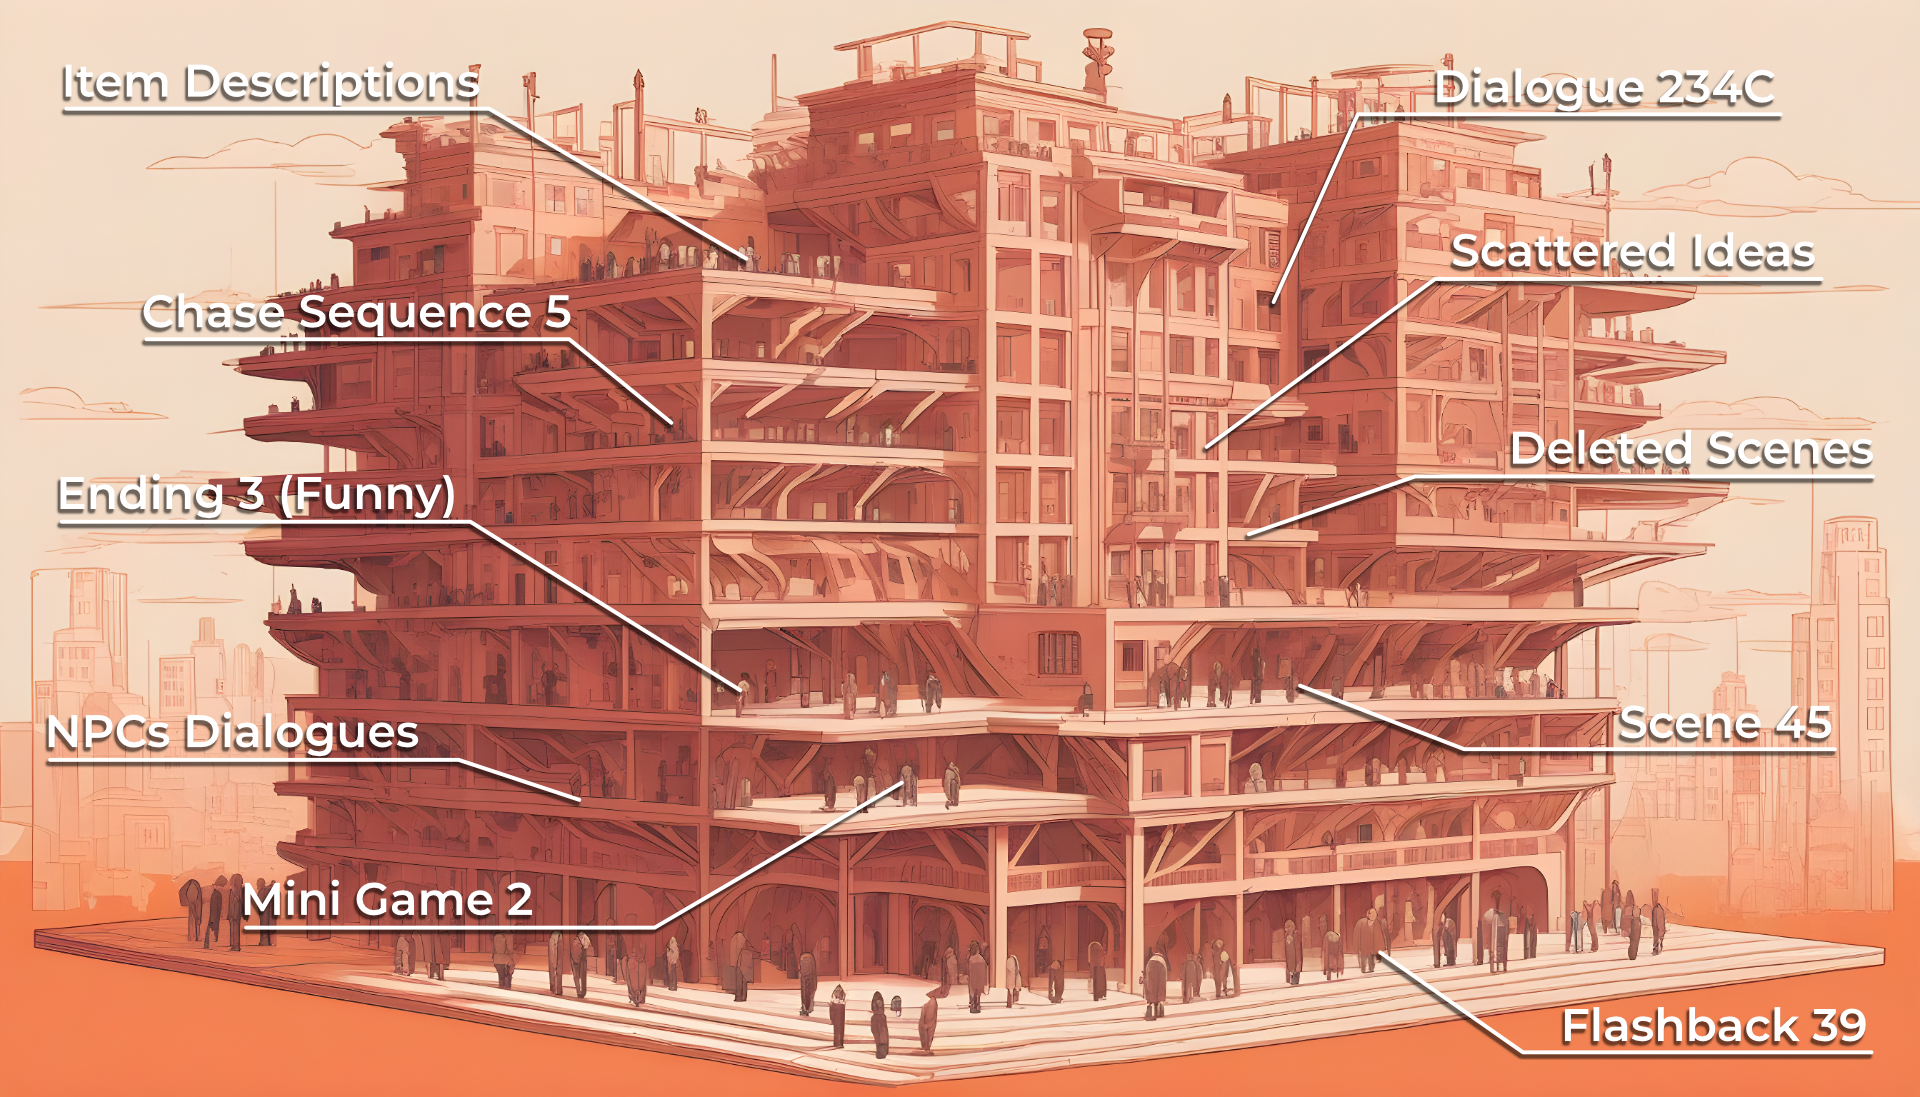 Illustration of a multi-storey building with each floor marked with labels like "Dialogue 234C," "Flashback 39," "Deleted Scenes," "Ideas," etc.